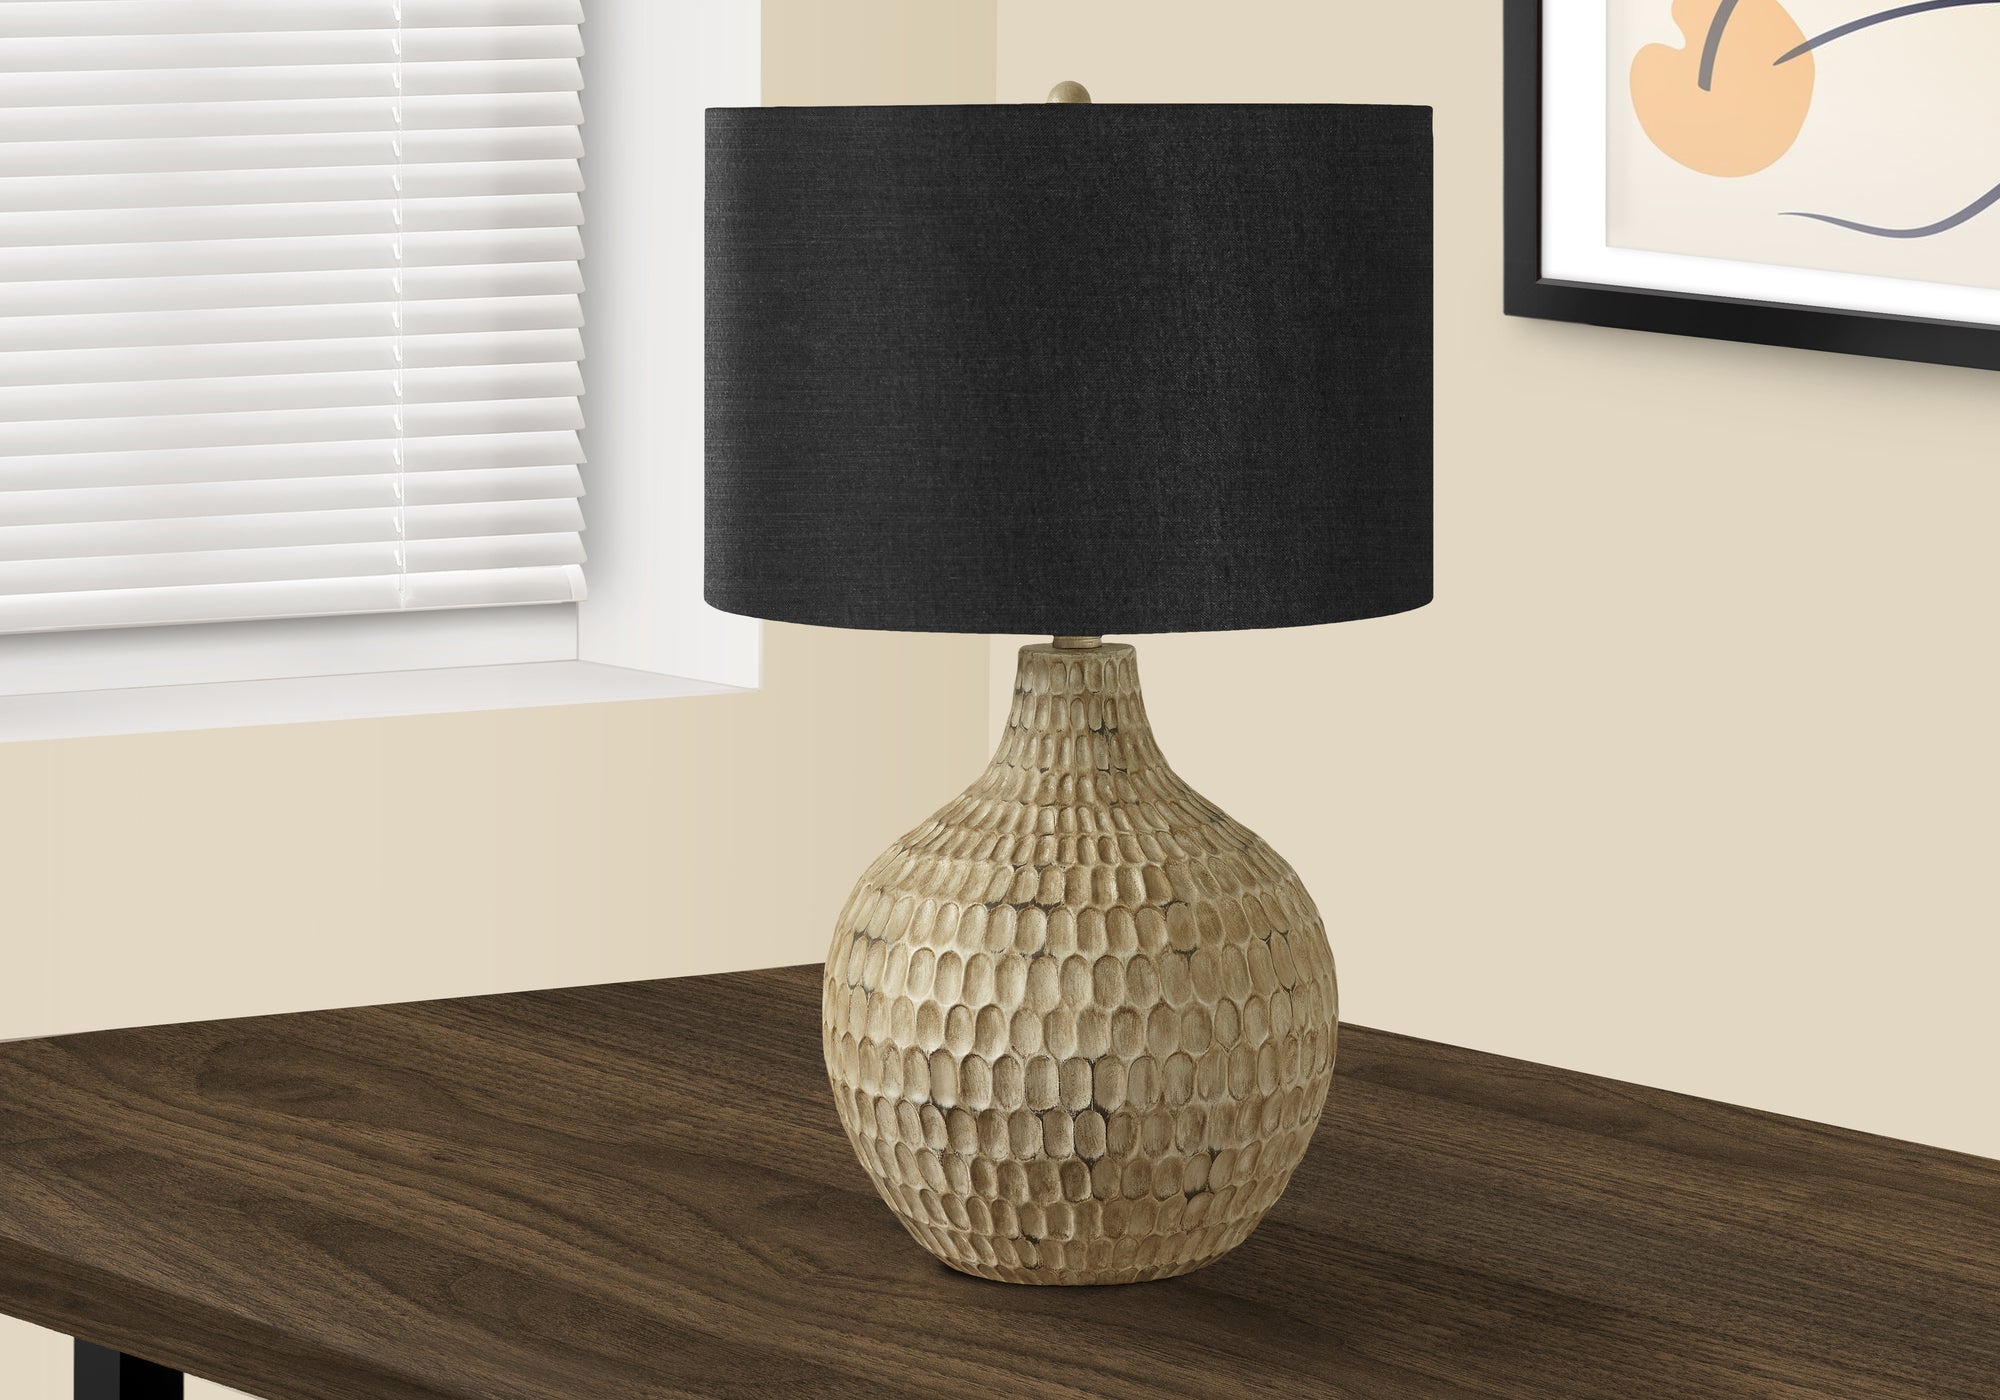 MN-819606    Lighting, 25"H, Table Lamp, Black Shade, Brown Resin, Contemporary